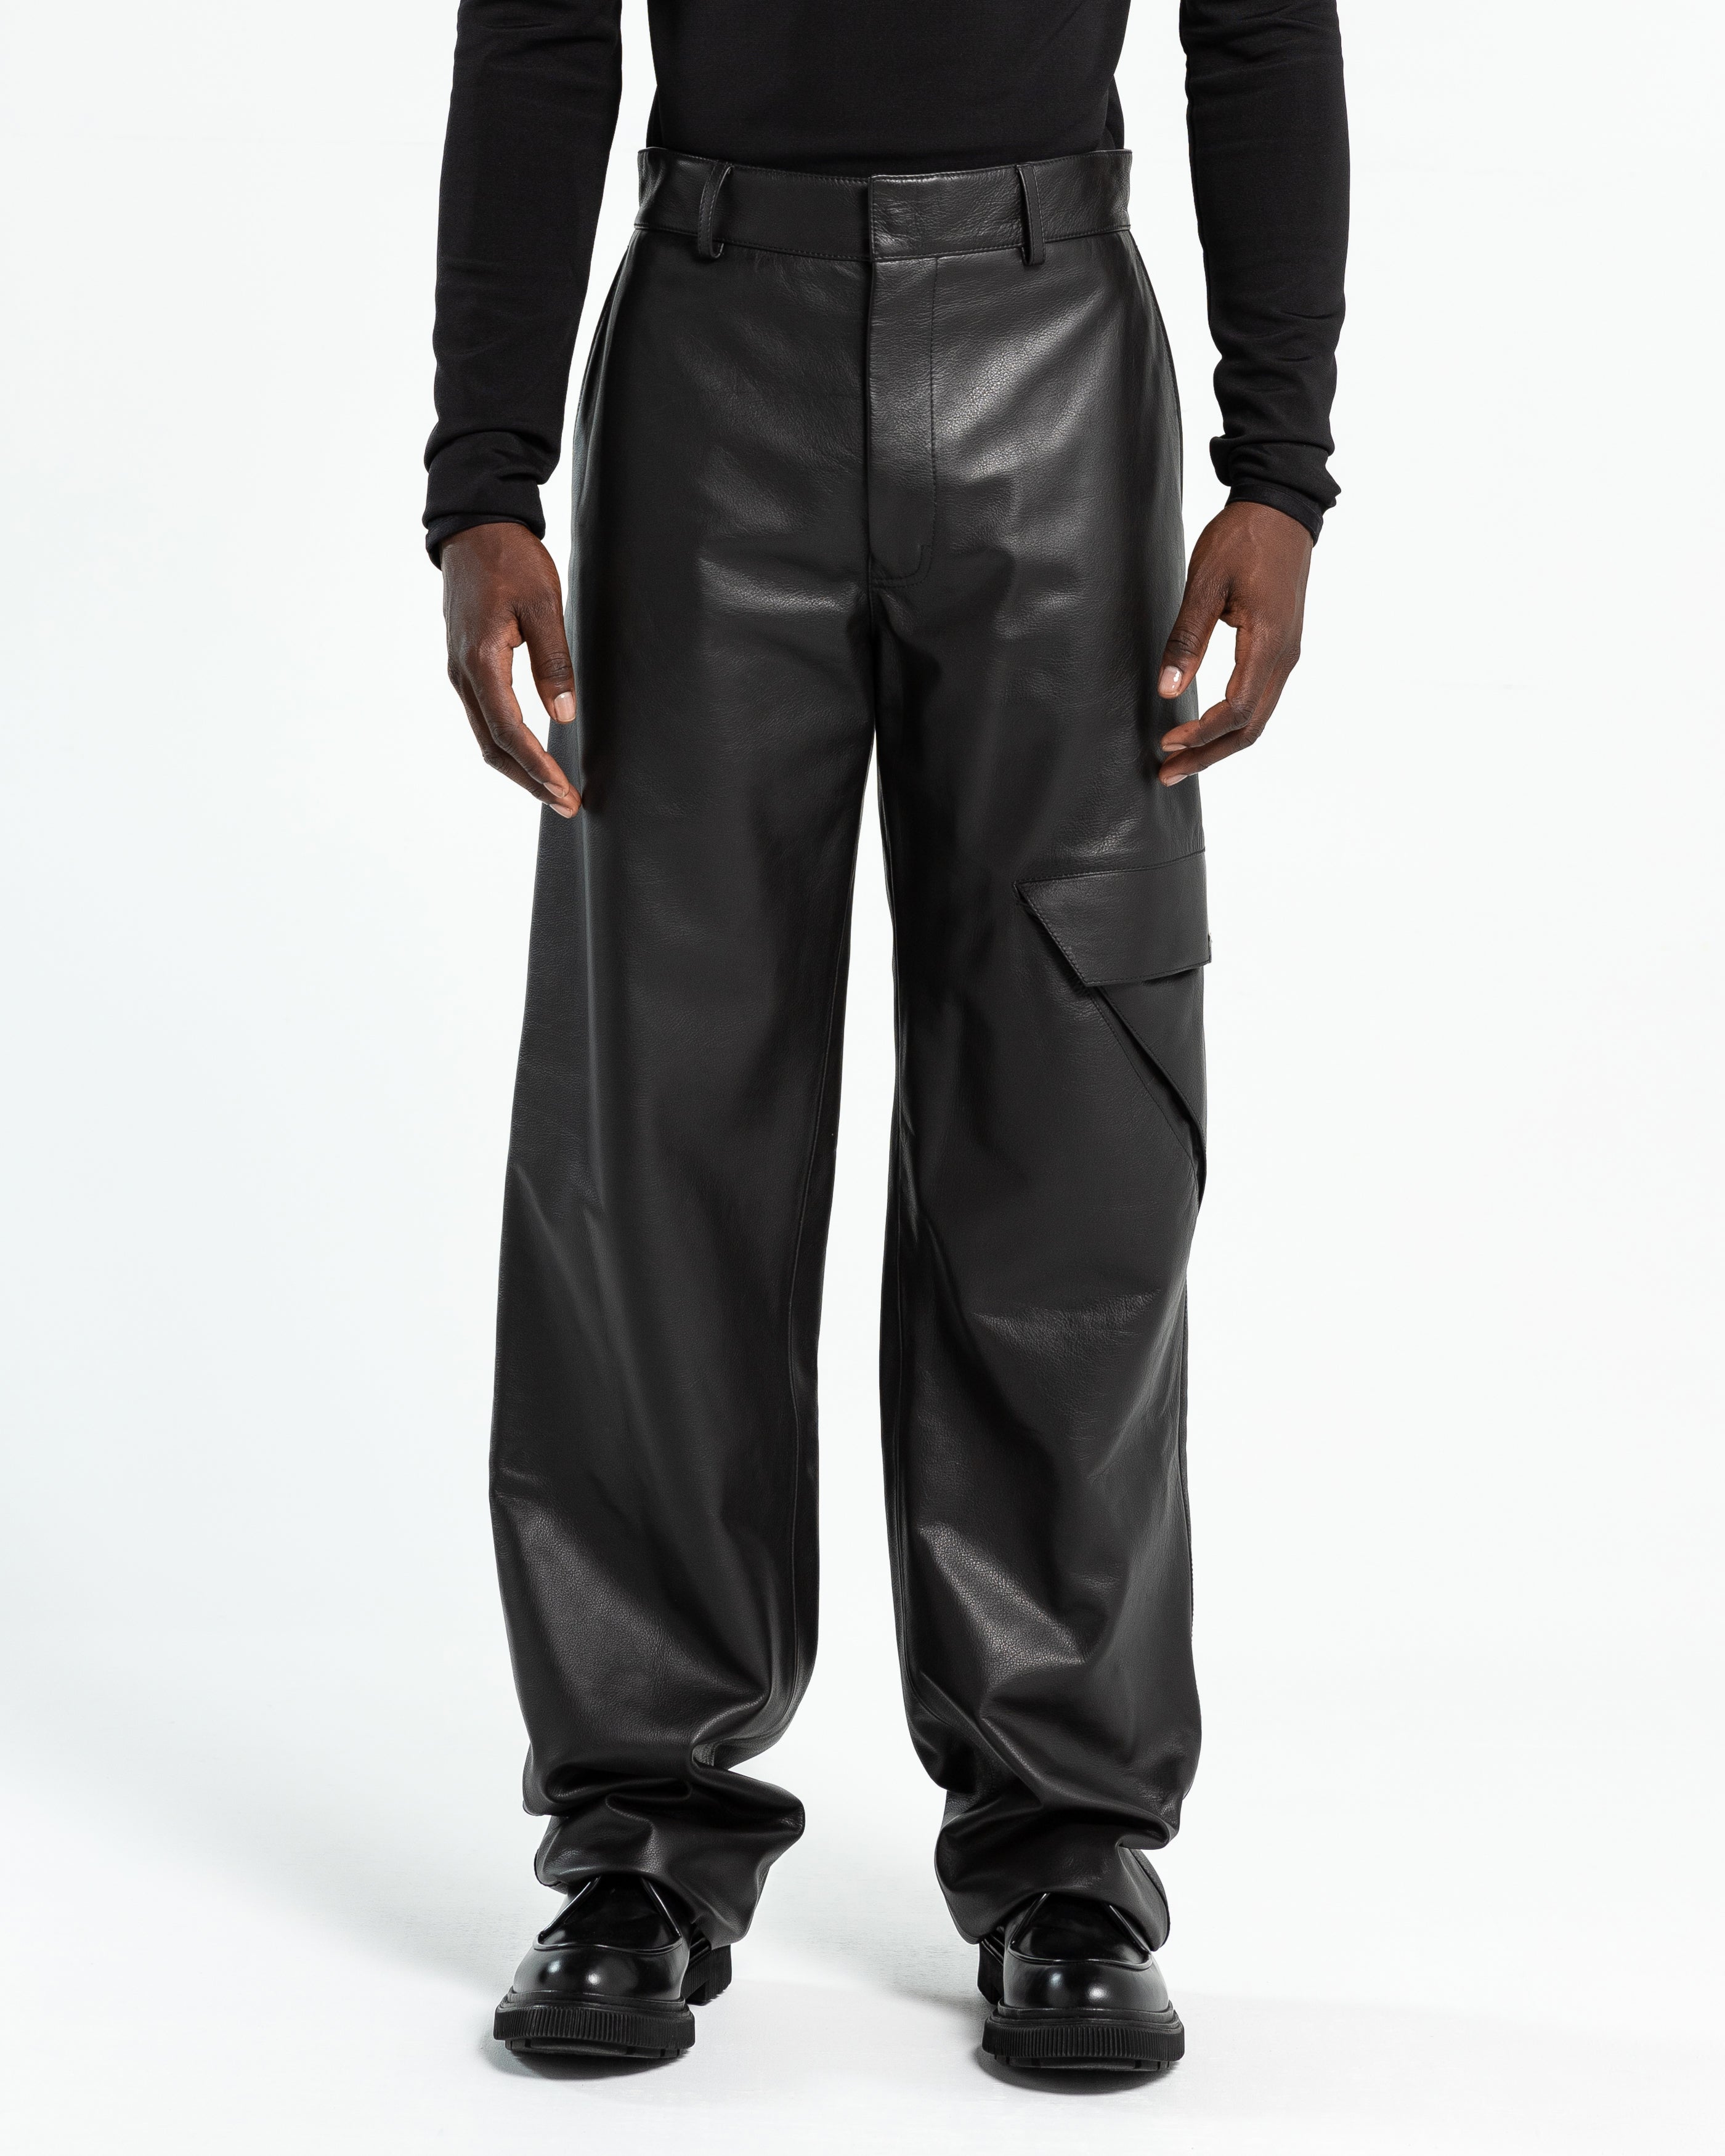 Special 70s issey Miyake leather pants - www.multimeshgroup.com